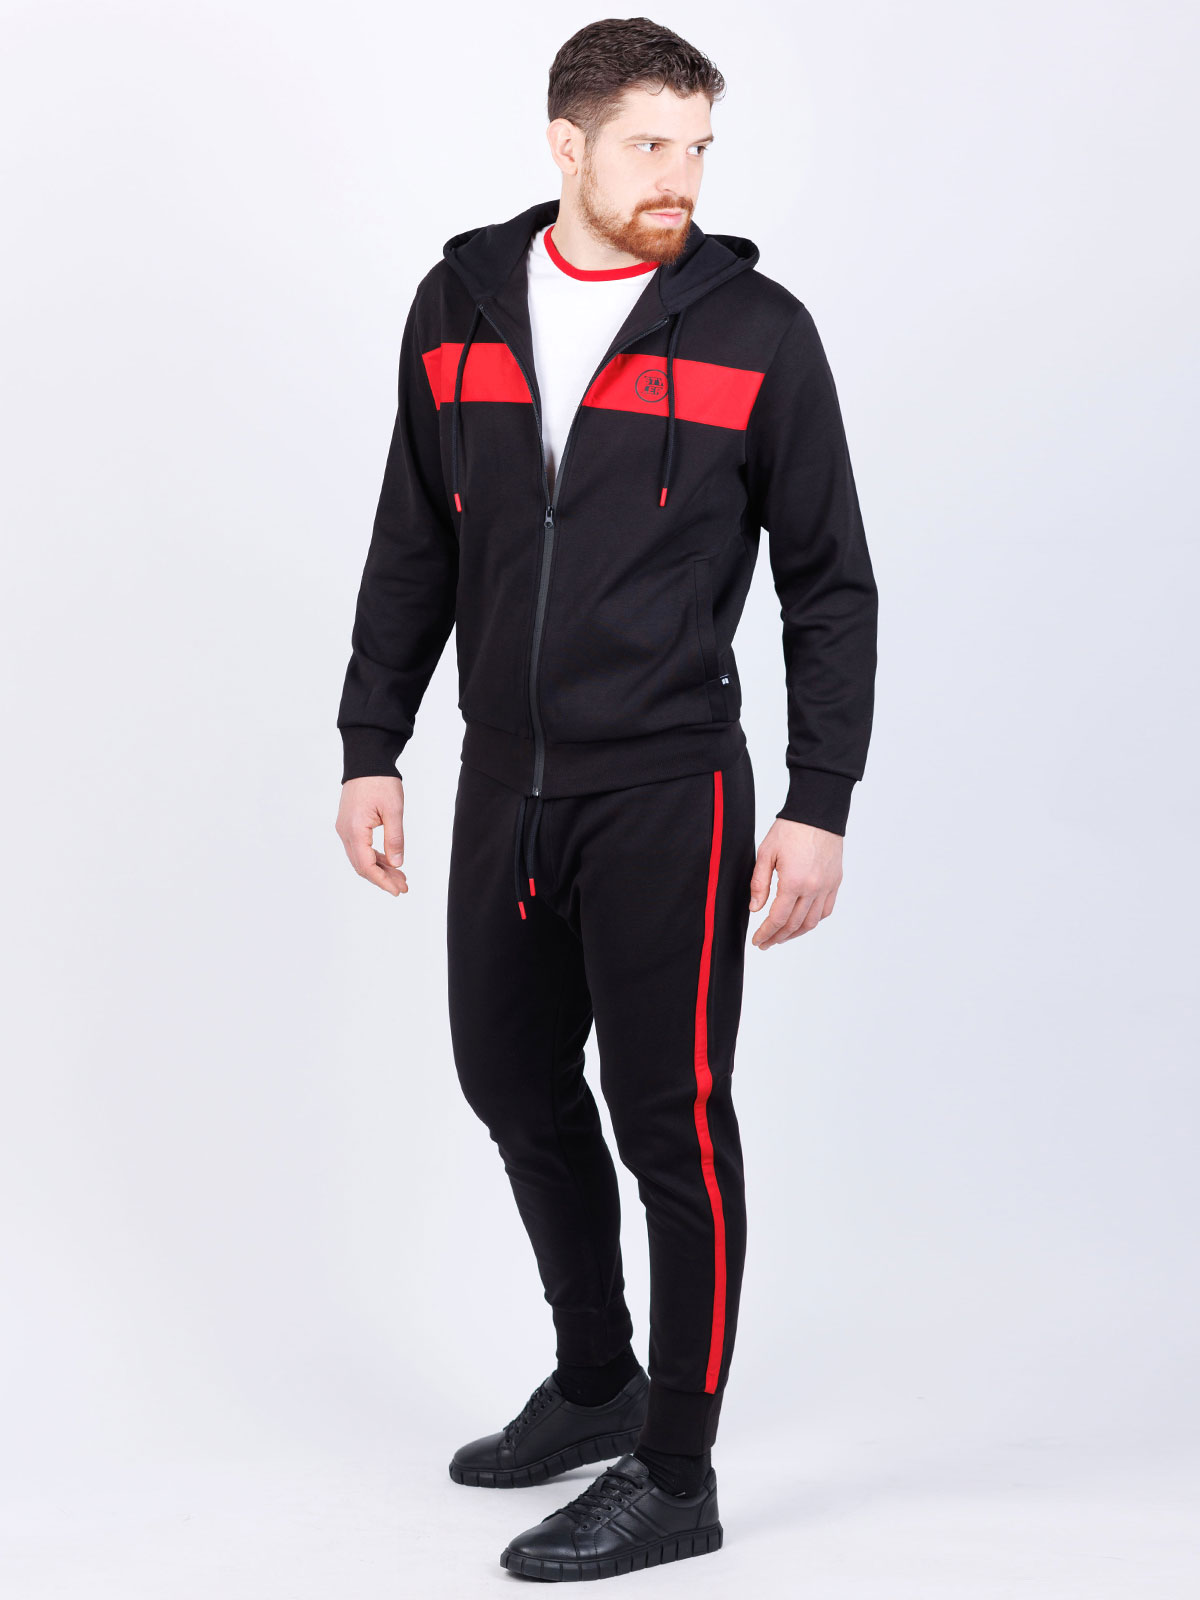 Sports bottom with red stripe - 29002 € 33.18 img2